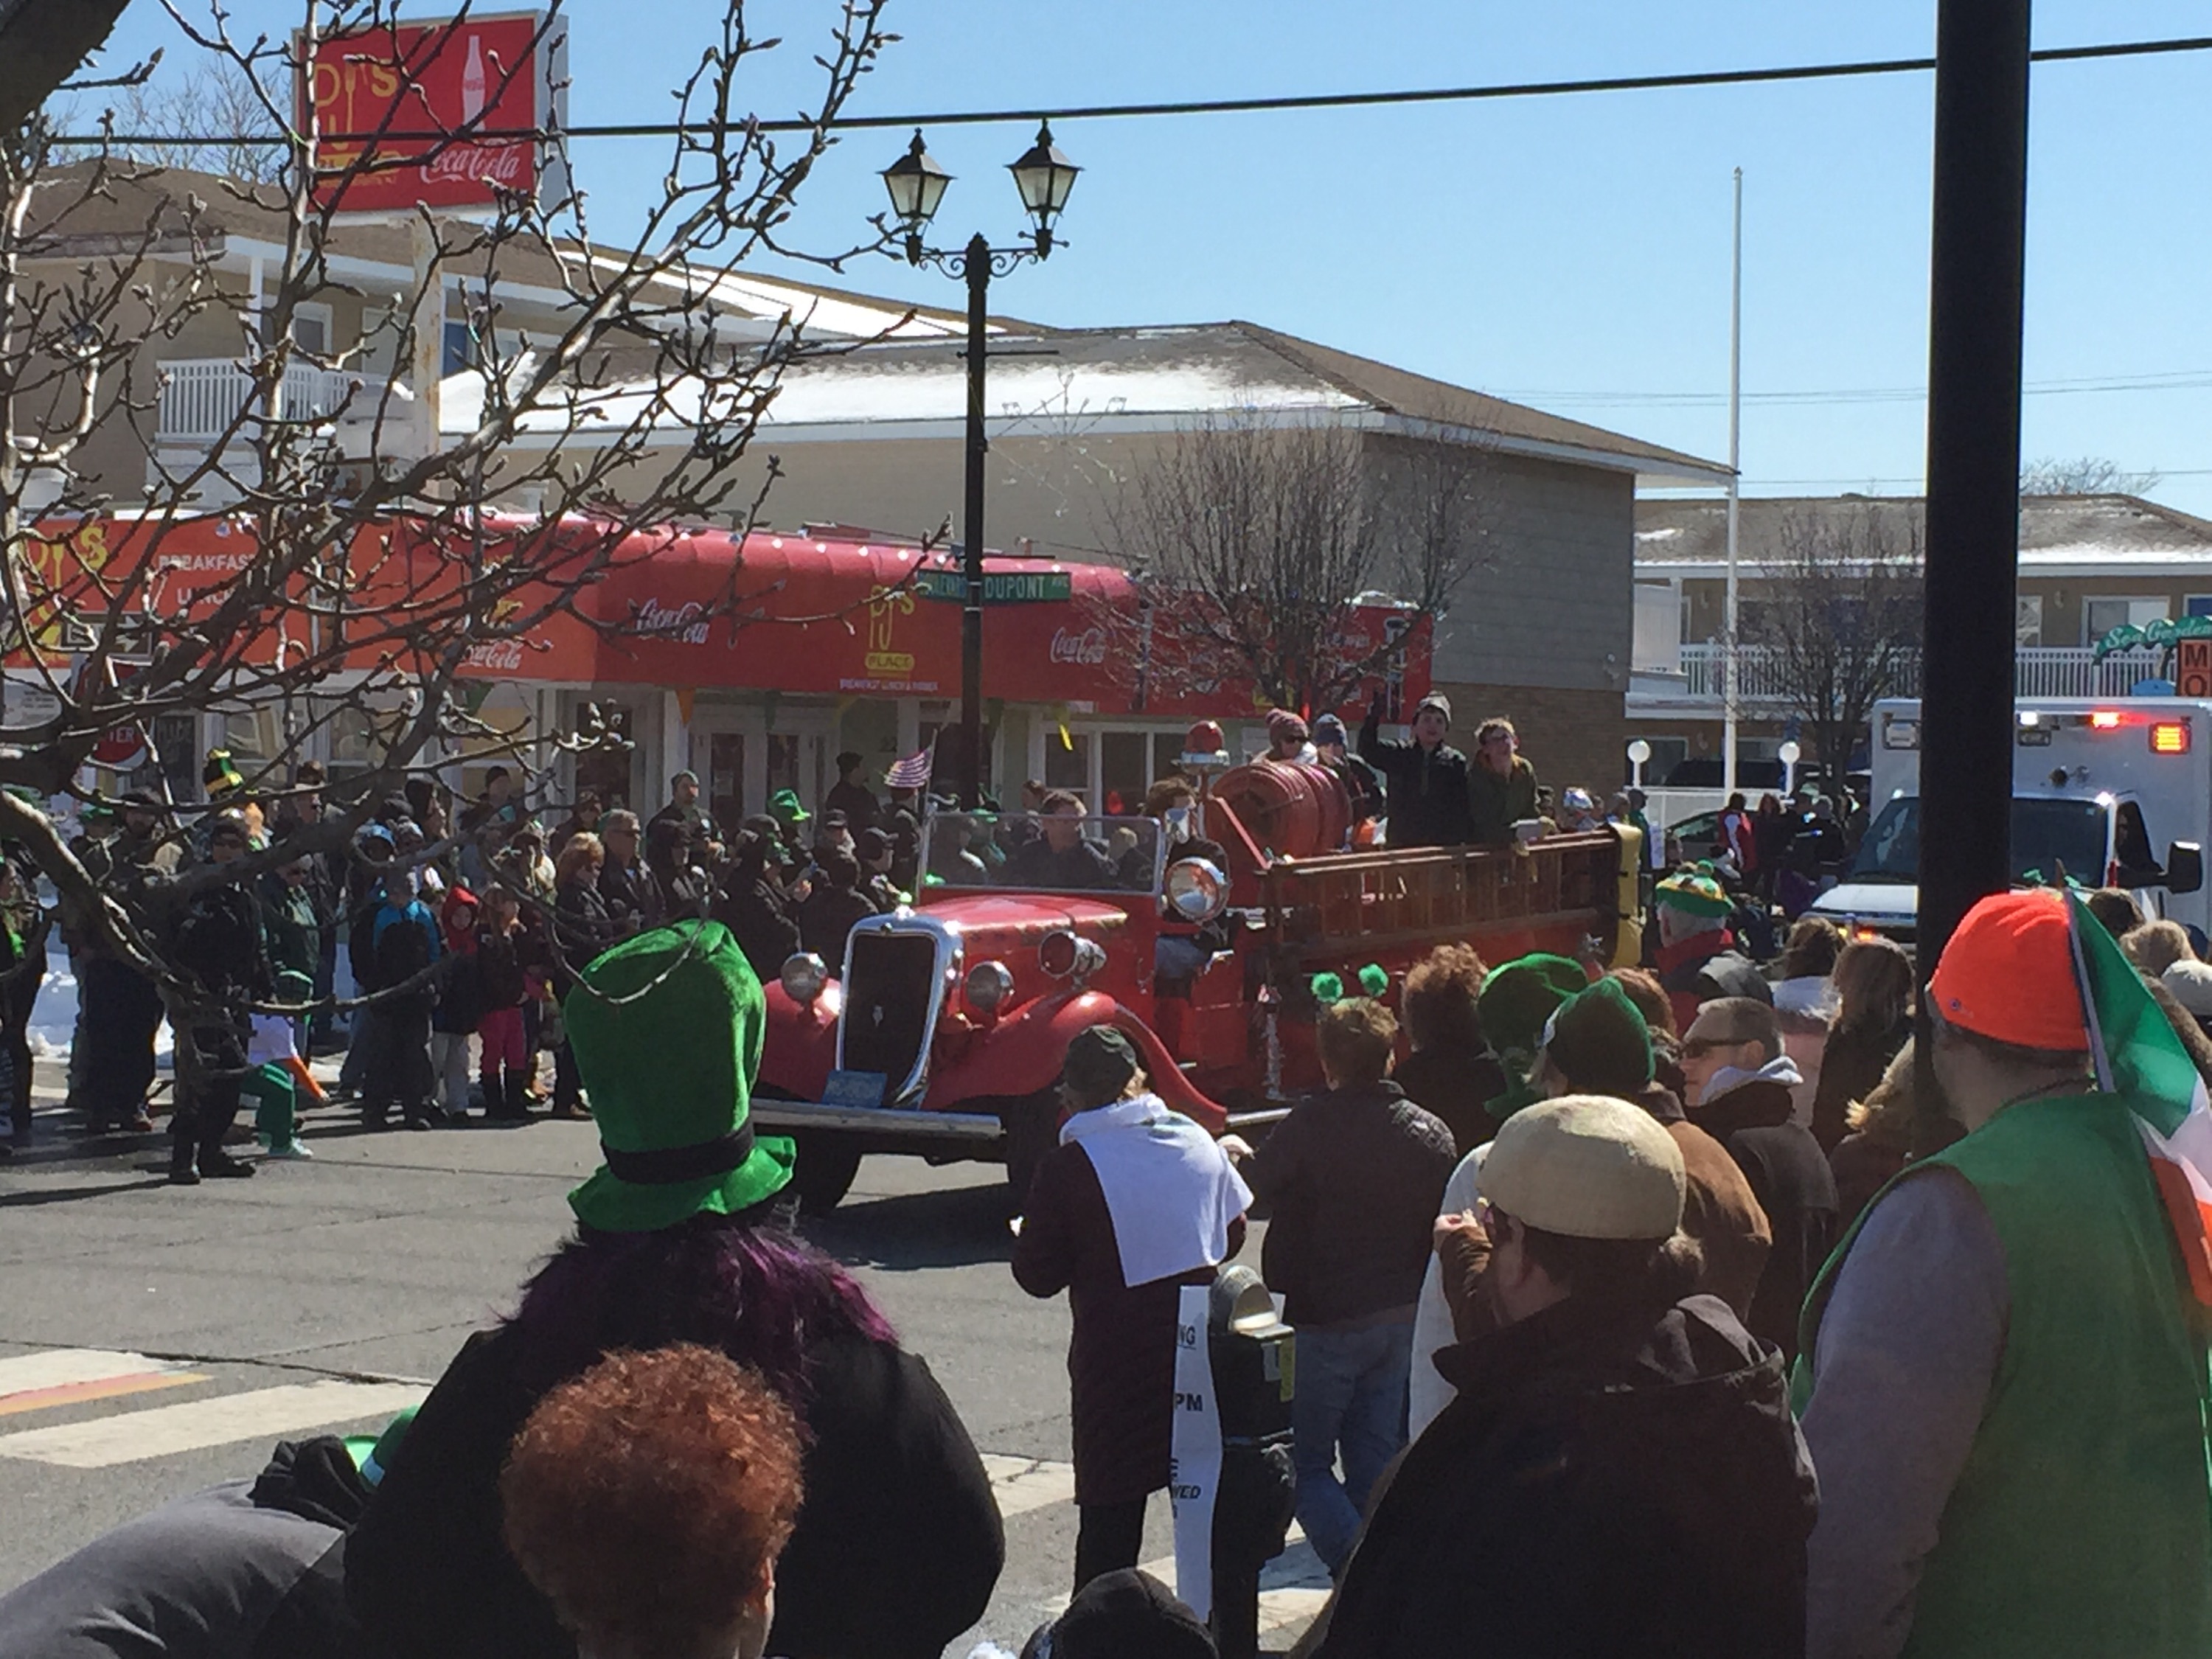 Seaside Heights St. Patrick’s Day Parade Marches On, Draws Thousands